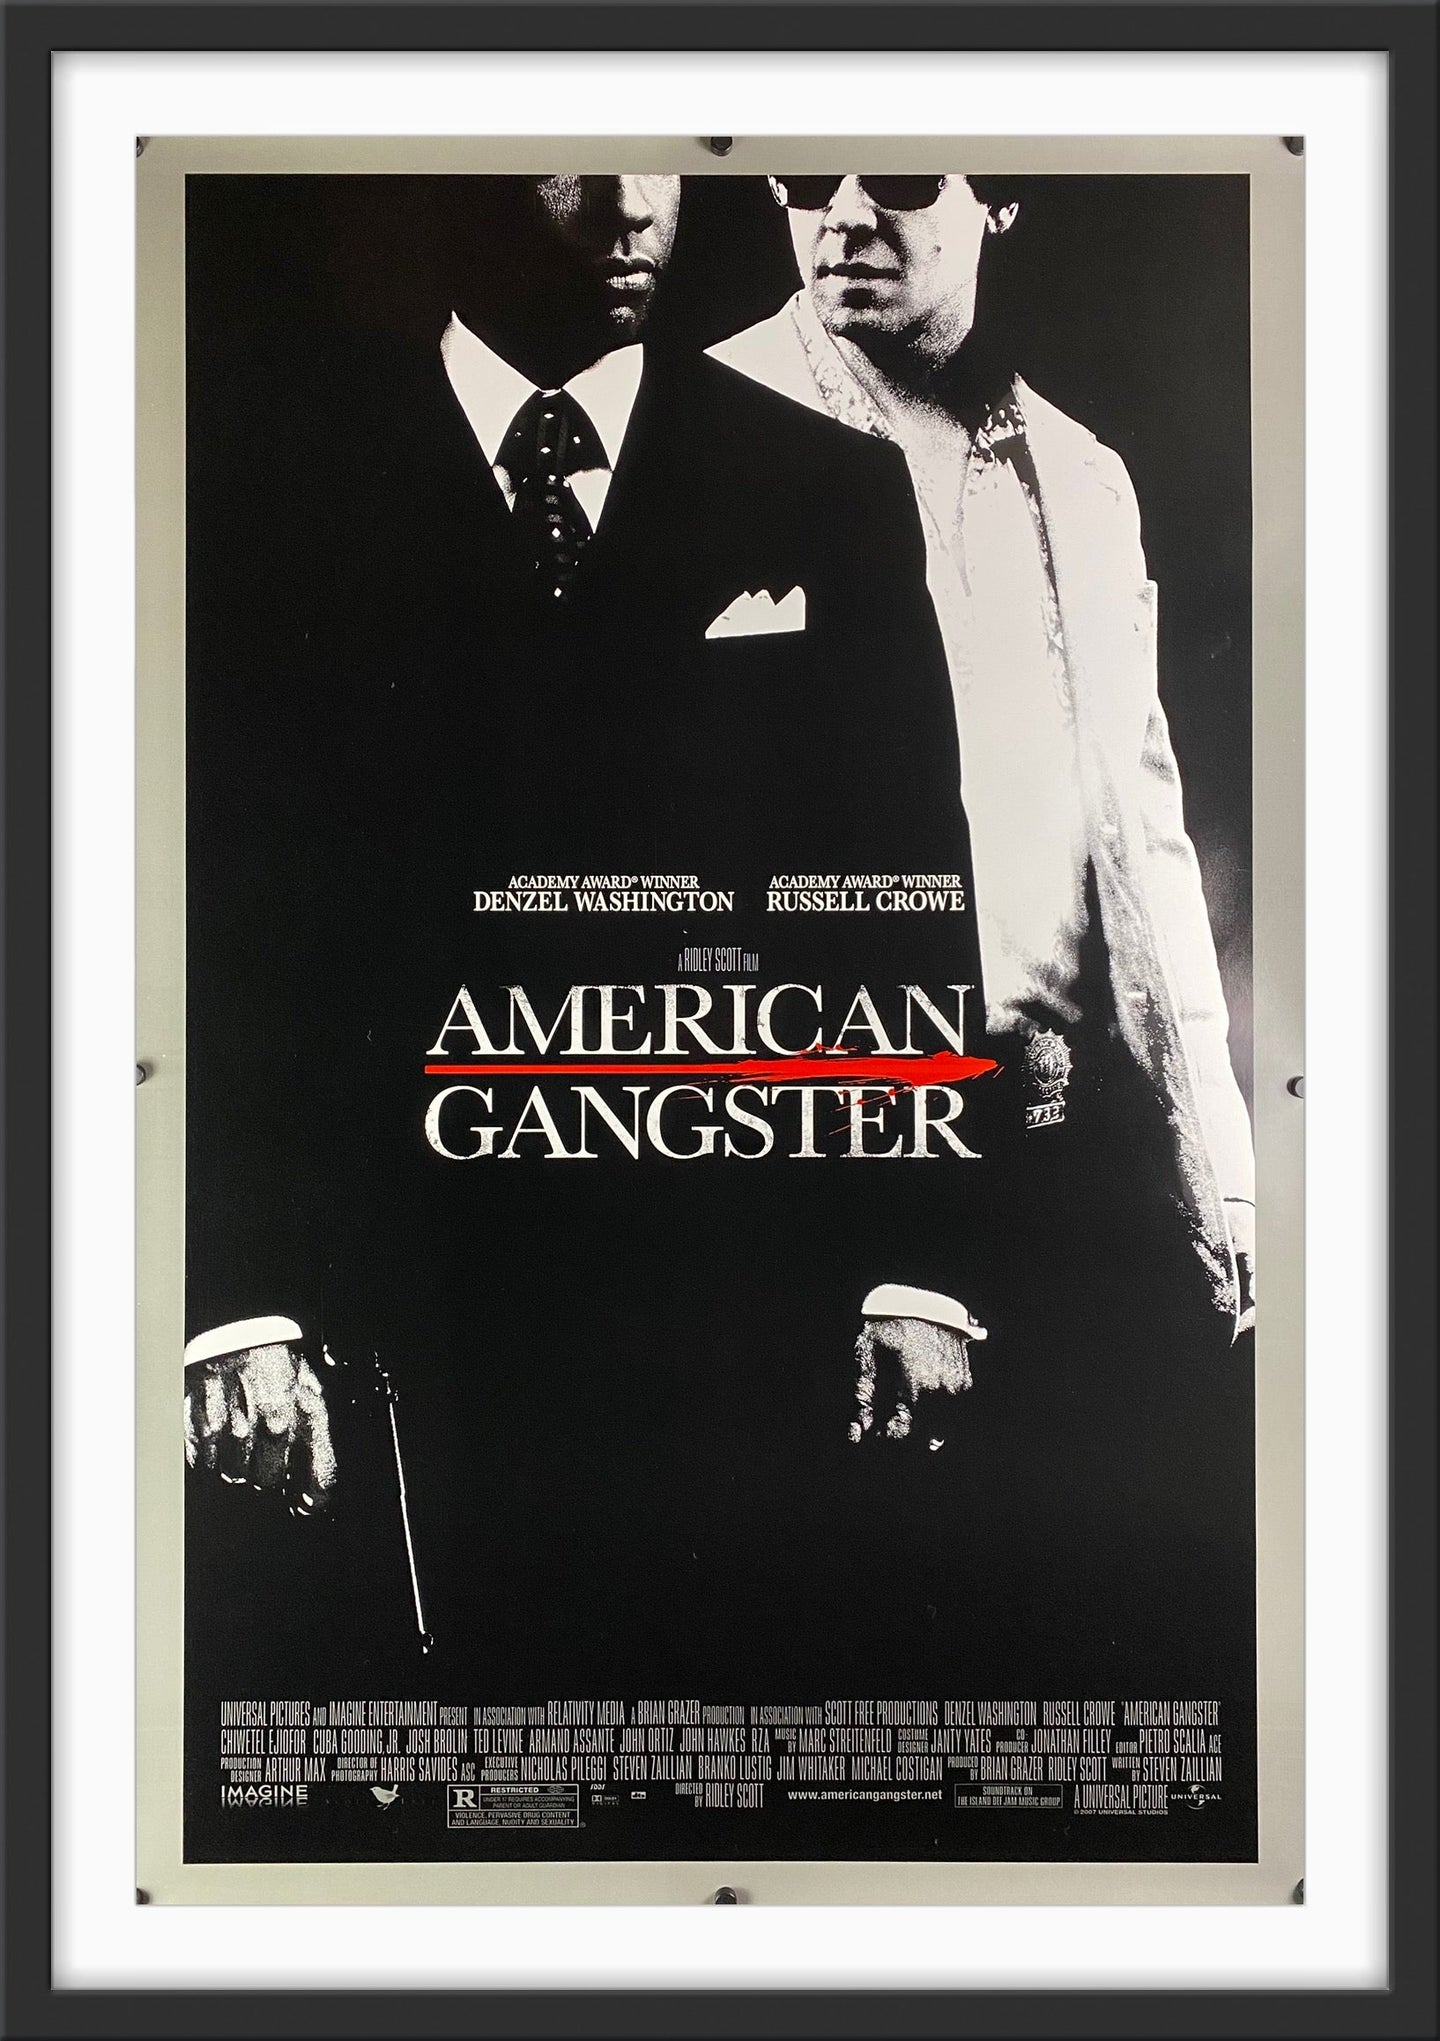 American Gangster - 2007 - Art of the Movies